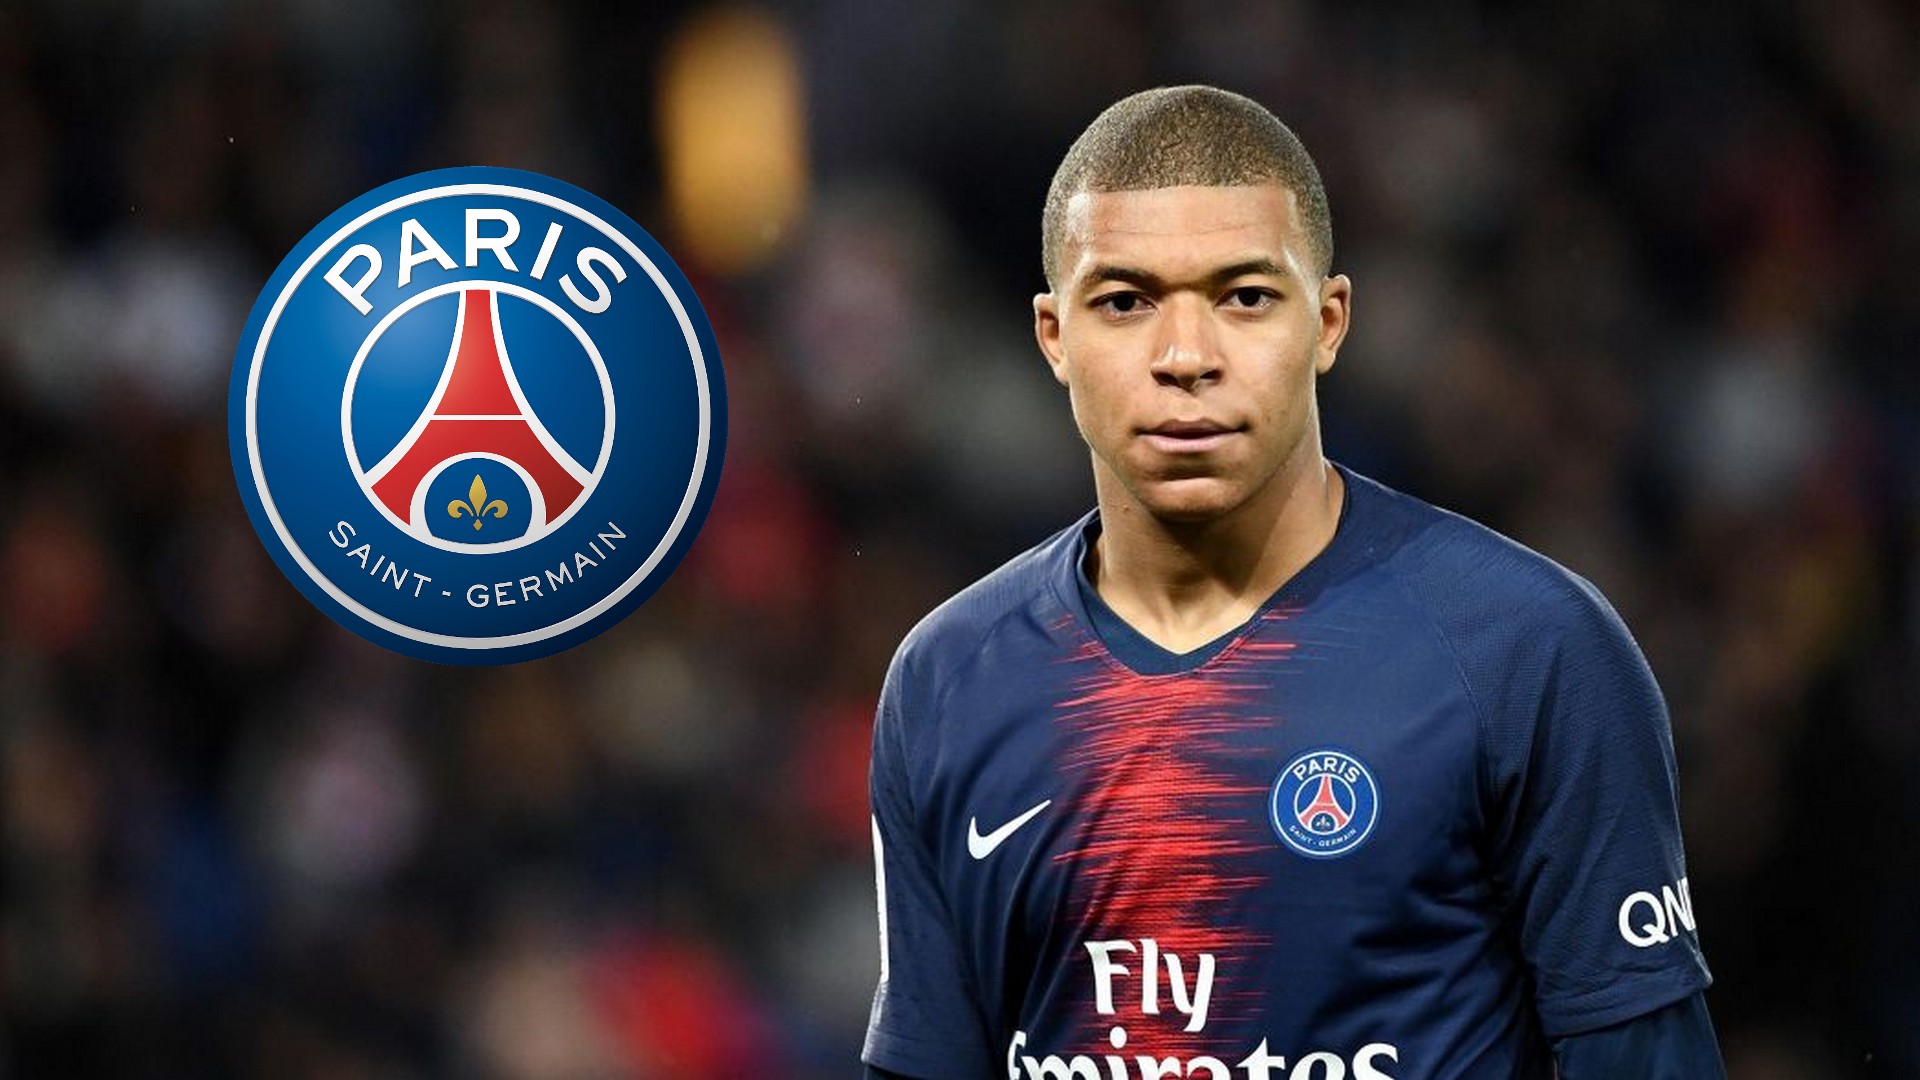 Kylian Mbappe PSG For PC Wallpaper With Resolution 1920X1080 pixel. You can make this wallpaper for your Mac or Windows Desktop Background, iPhone, Android or Tablet and another Smartphone device for free